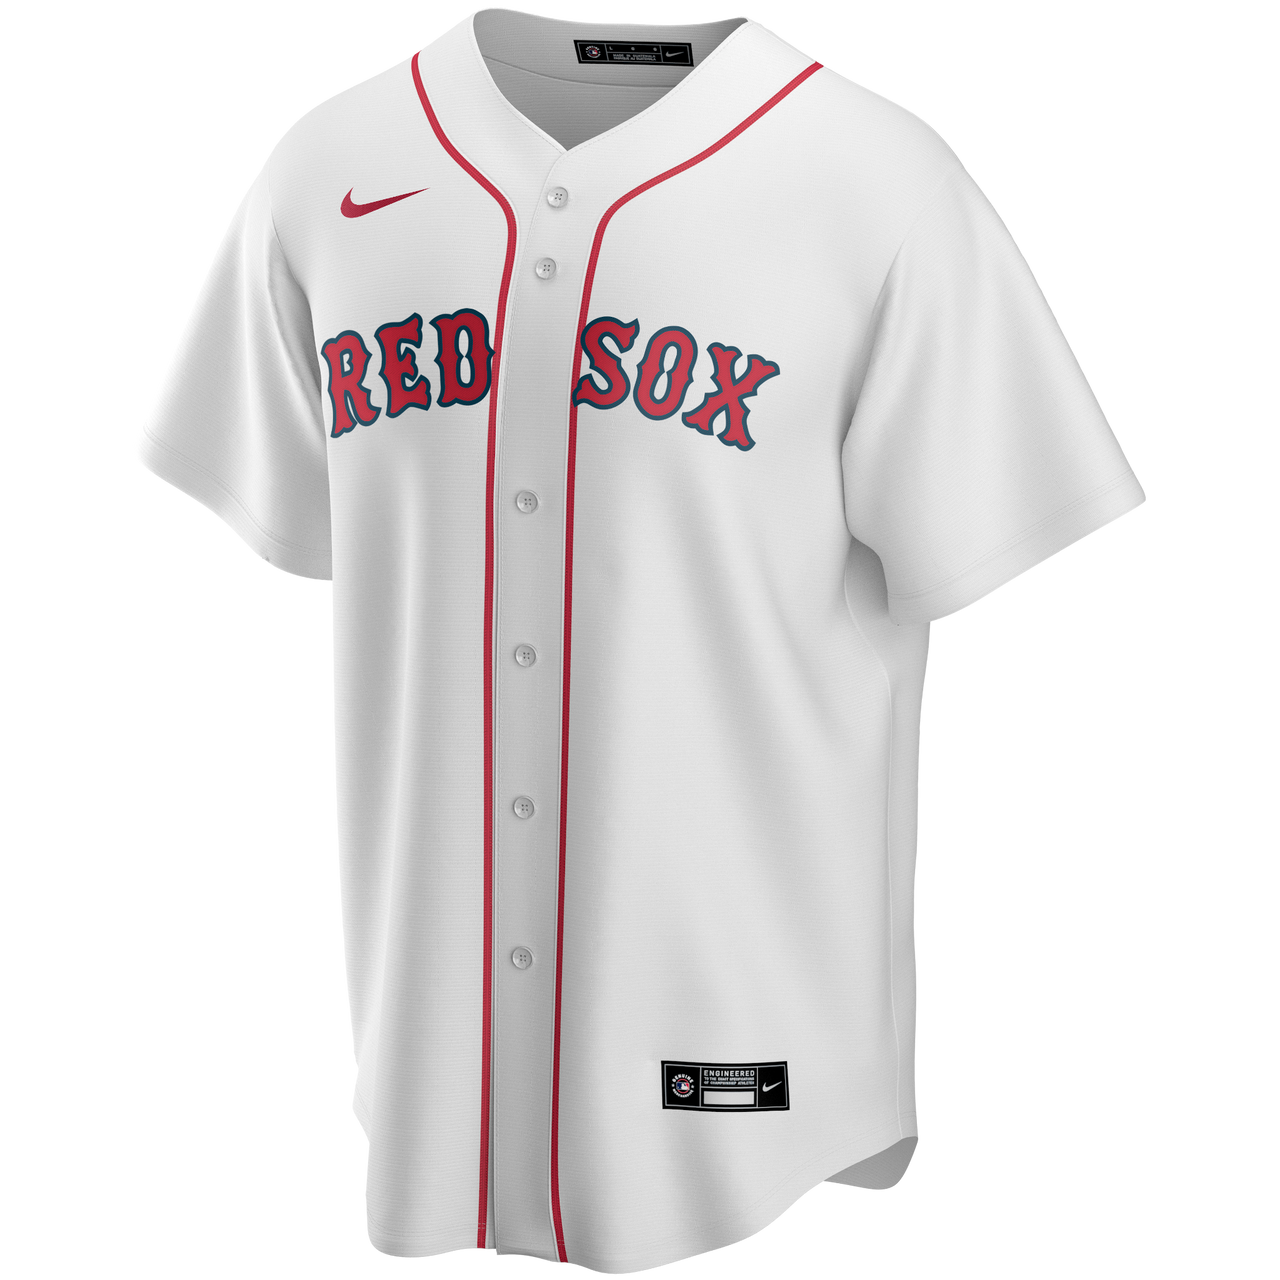 Does Anyone Have A Good Looking Men's Medium-Sized Dustin Pedroia Jersey  That's Red With Blue Pipings? : r/redsox